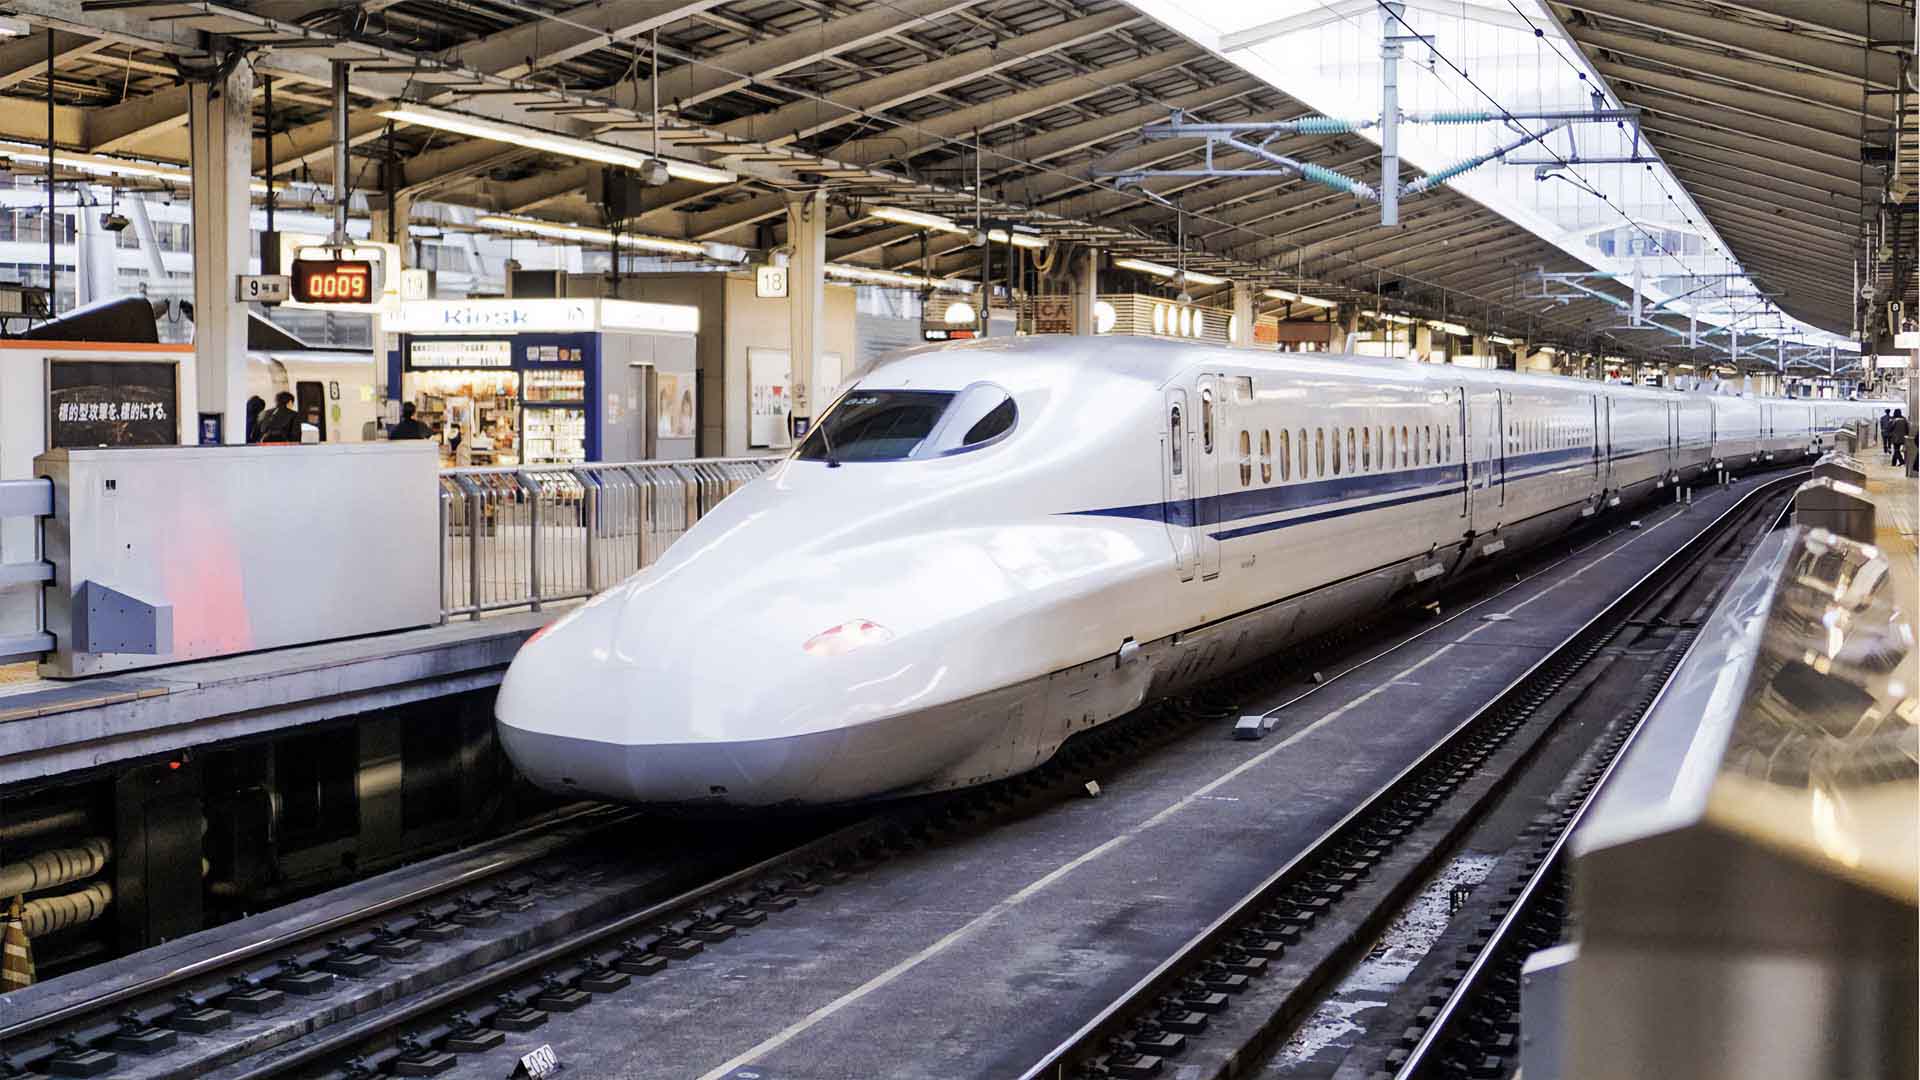 The North Atlantic Rail promises high-speed trains like this